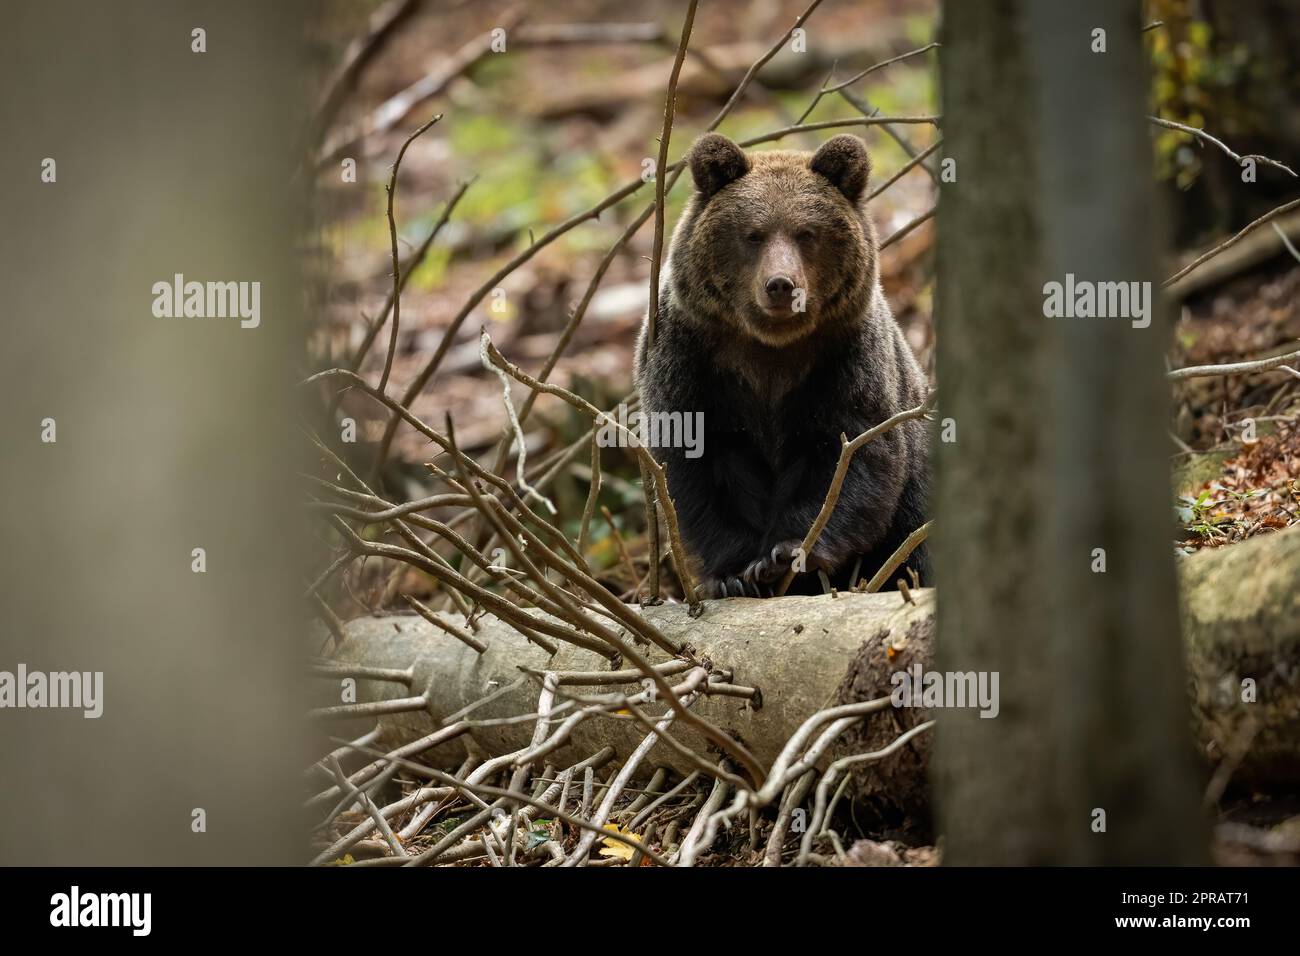 Curious brown bear peeking out from behind a fallen tree in spring forest Stock Photo